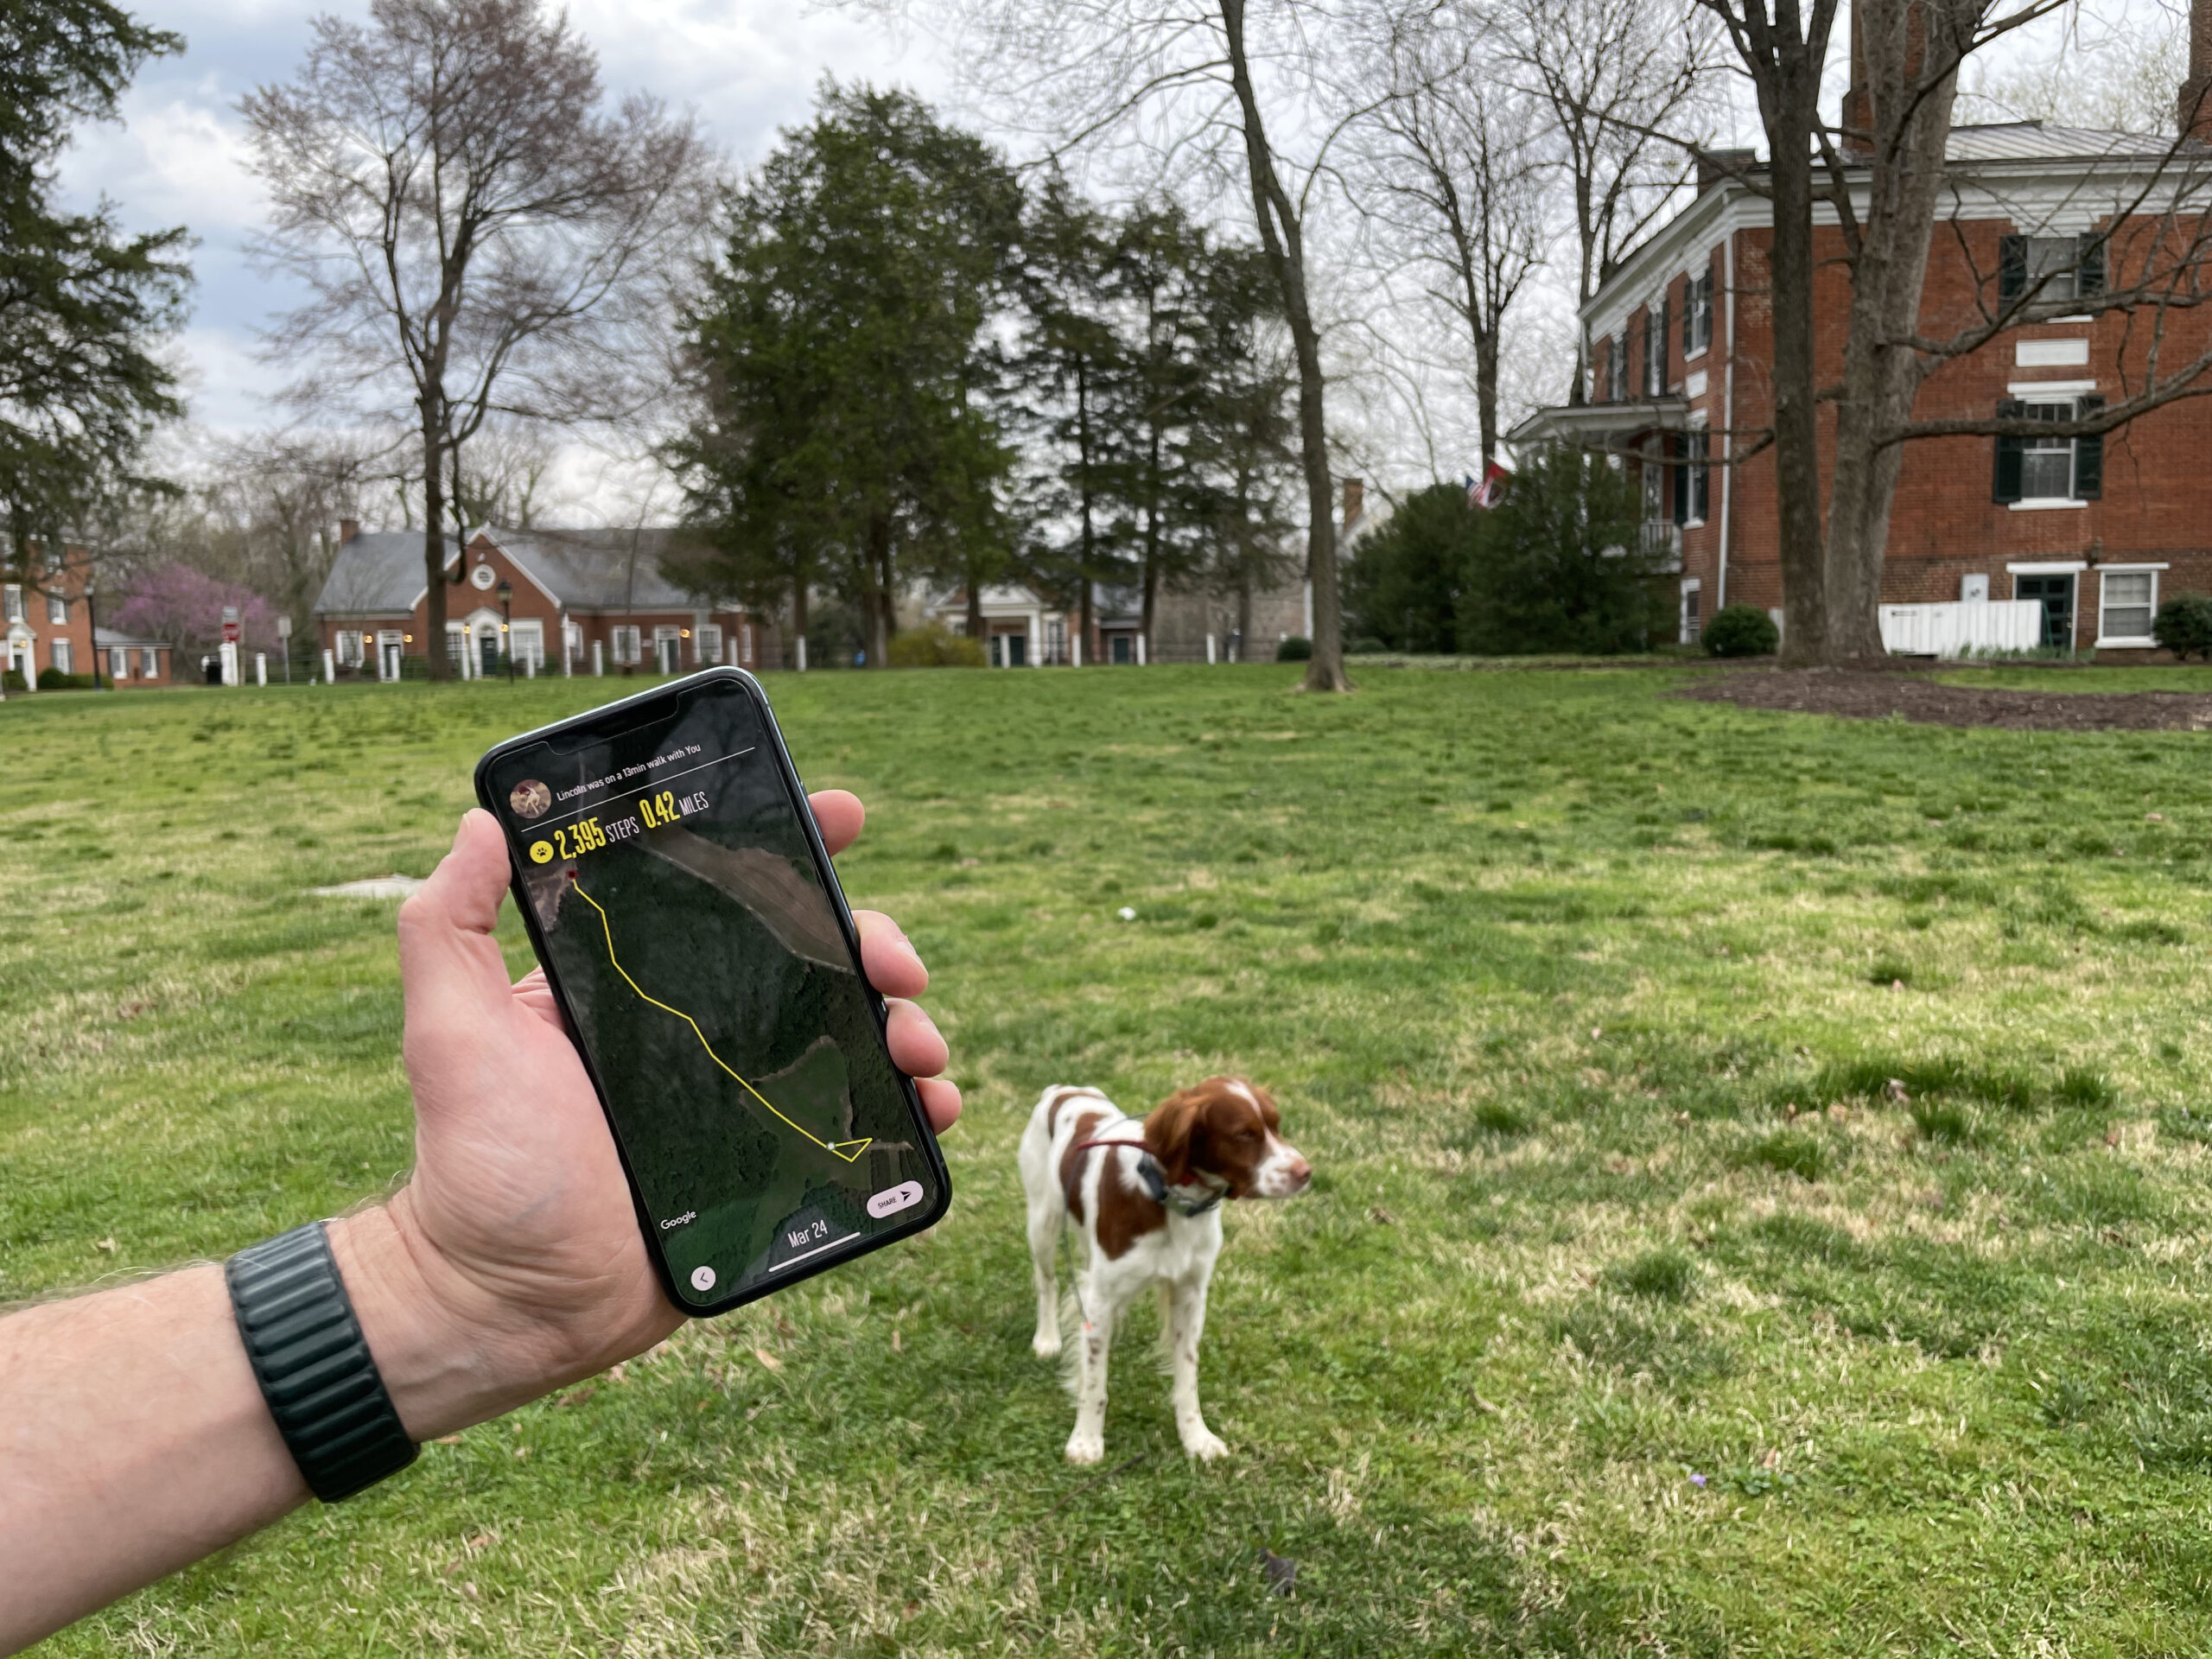 The app allows you to track your dogs path. Robb Moore